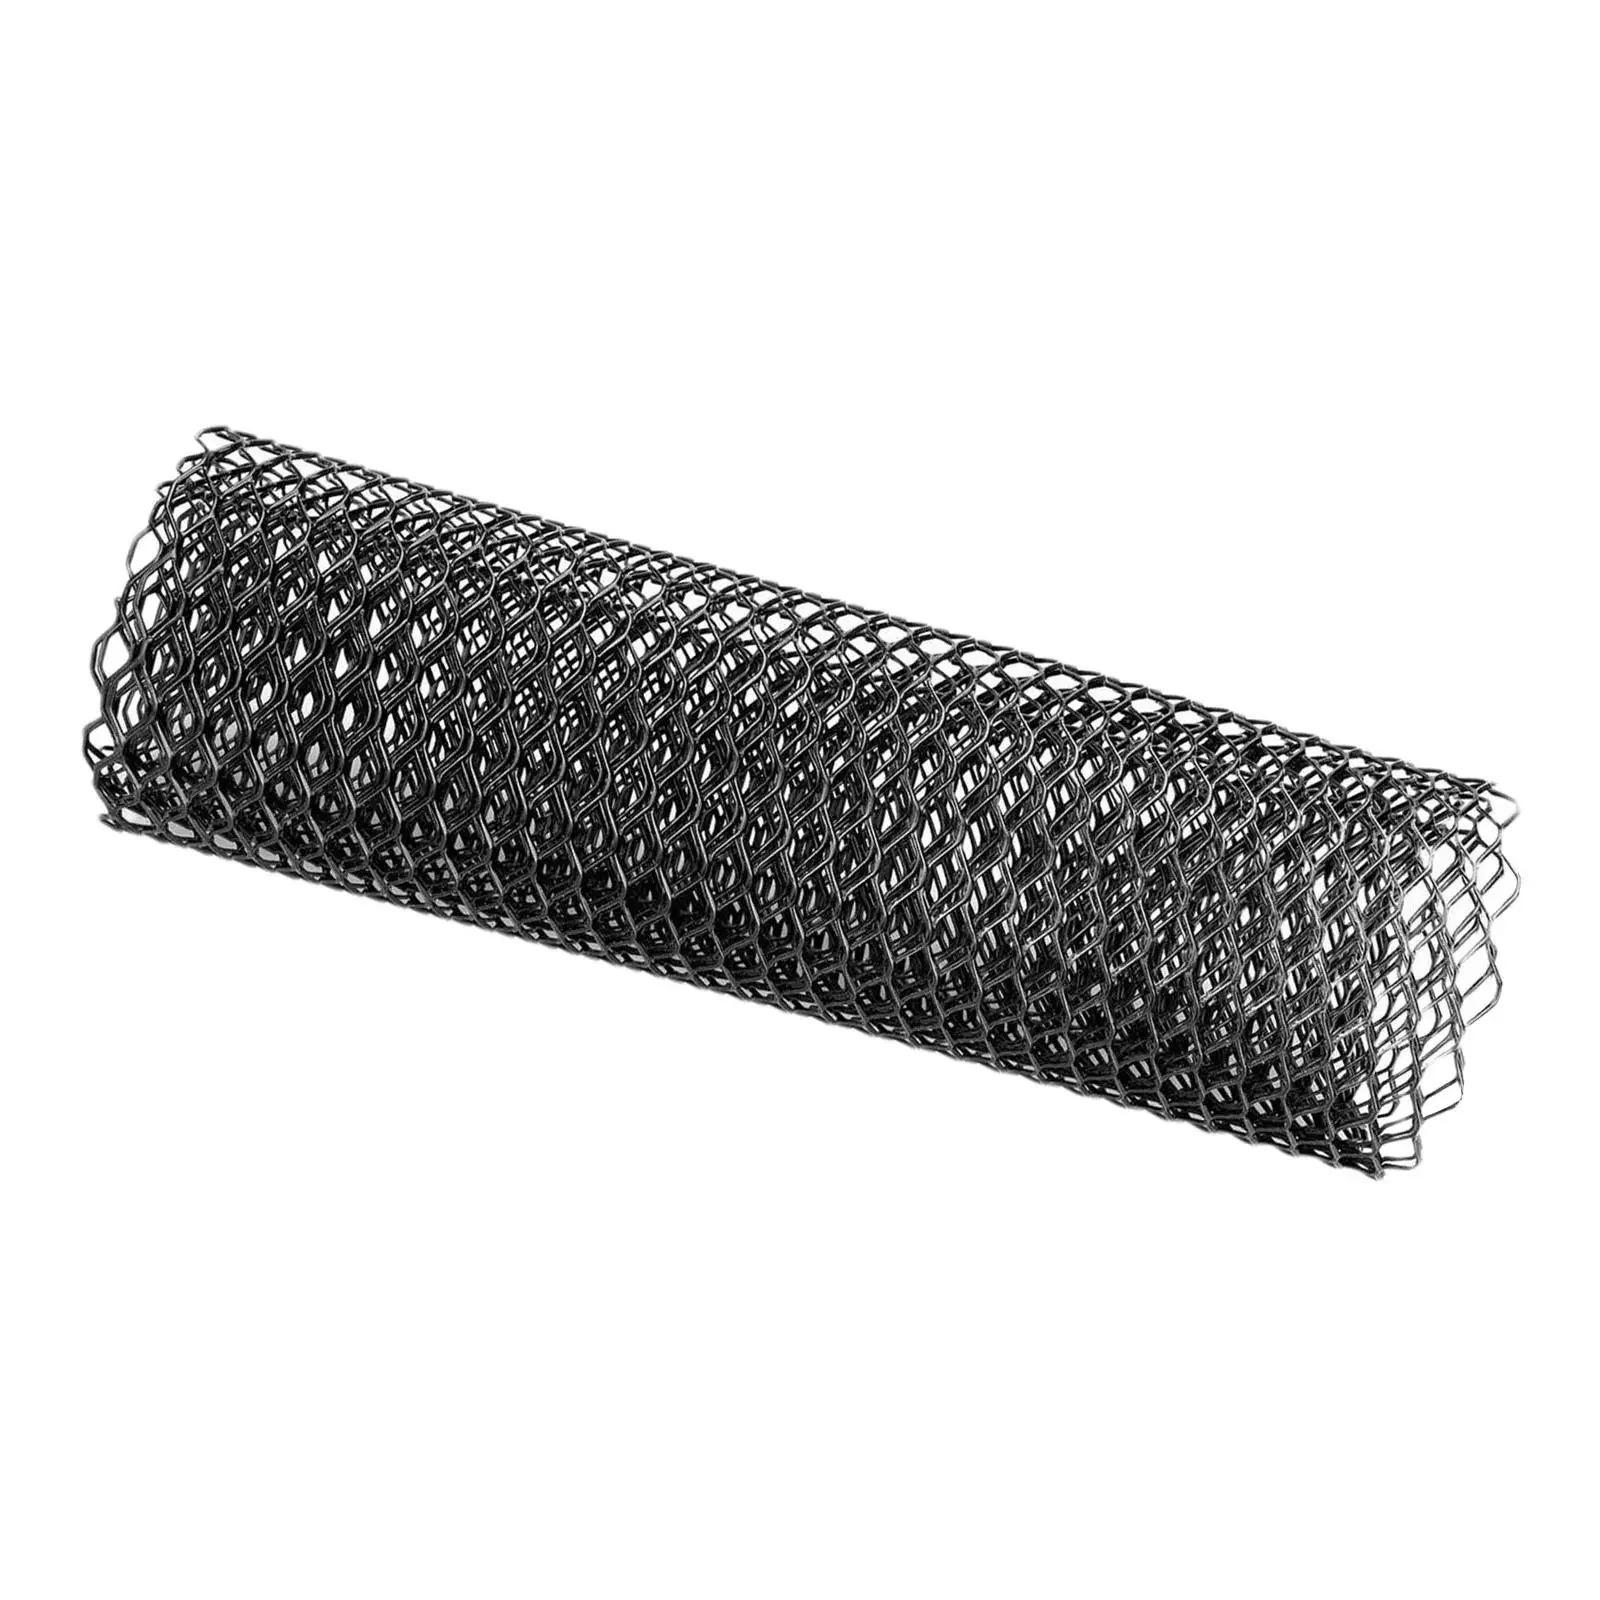 Grille  Sheet 40x13inch Replace Universal, Modified Parts, Grille Insert ,Multifunctional Rhombic Black Durable Roll 